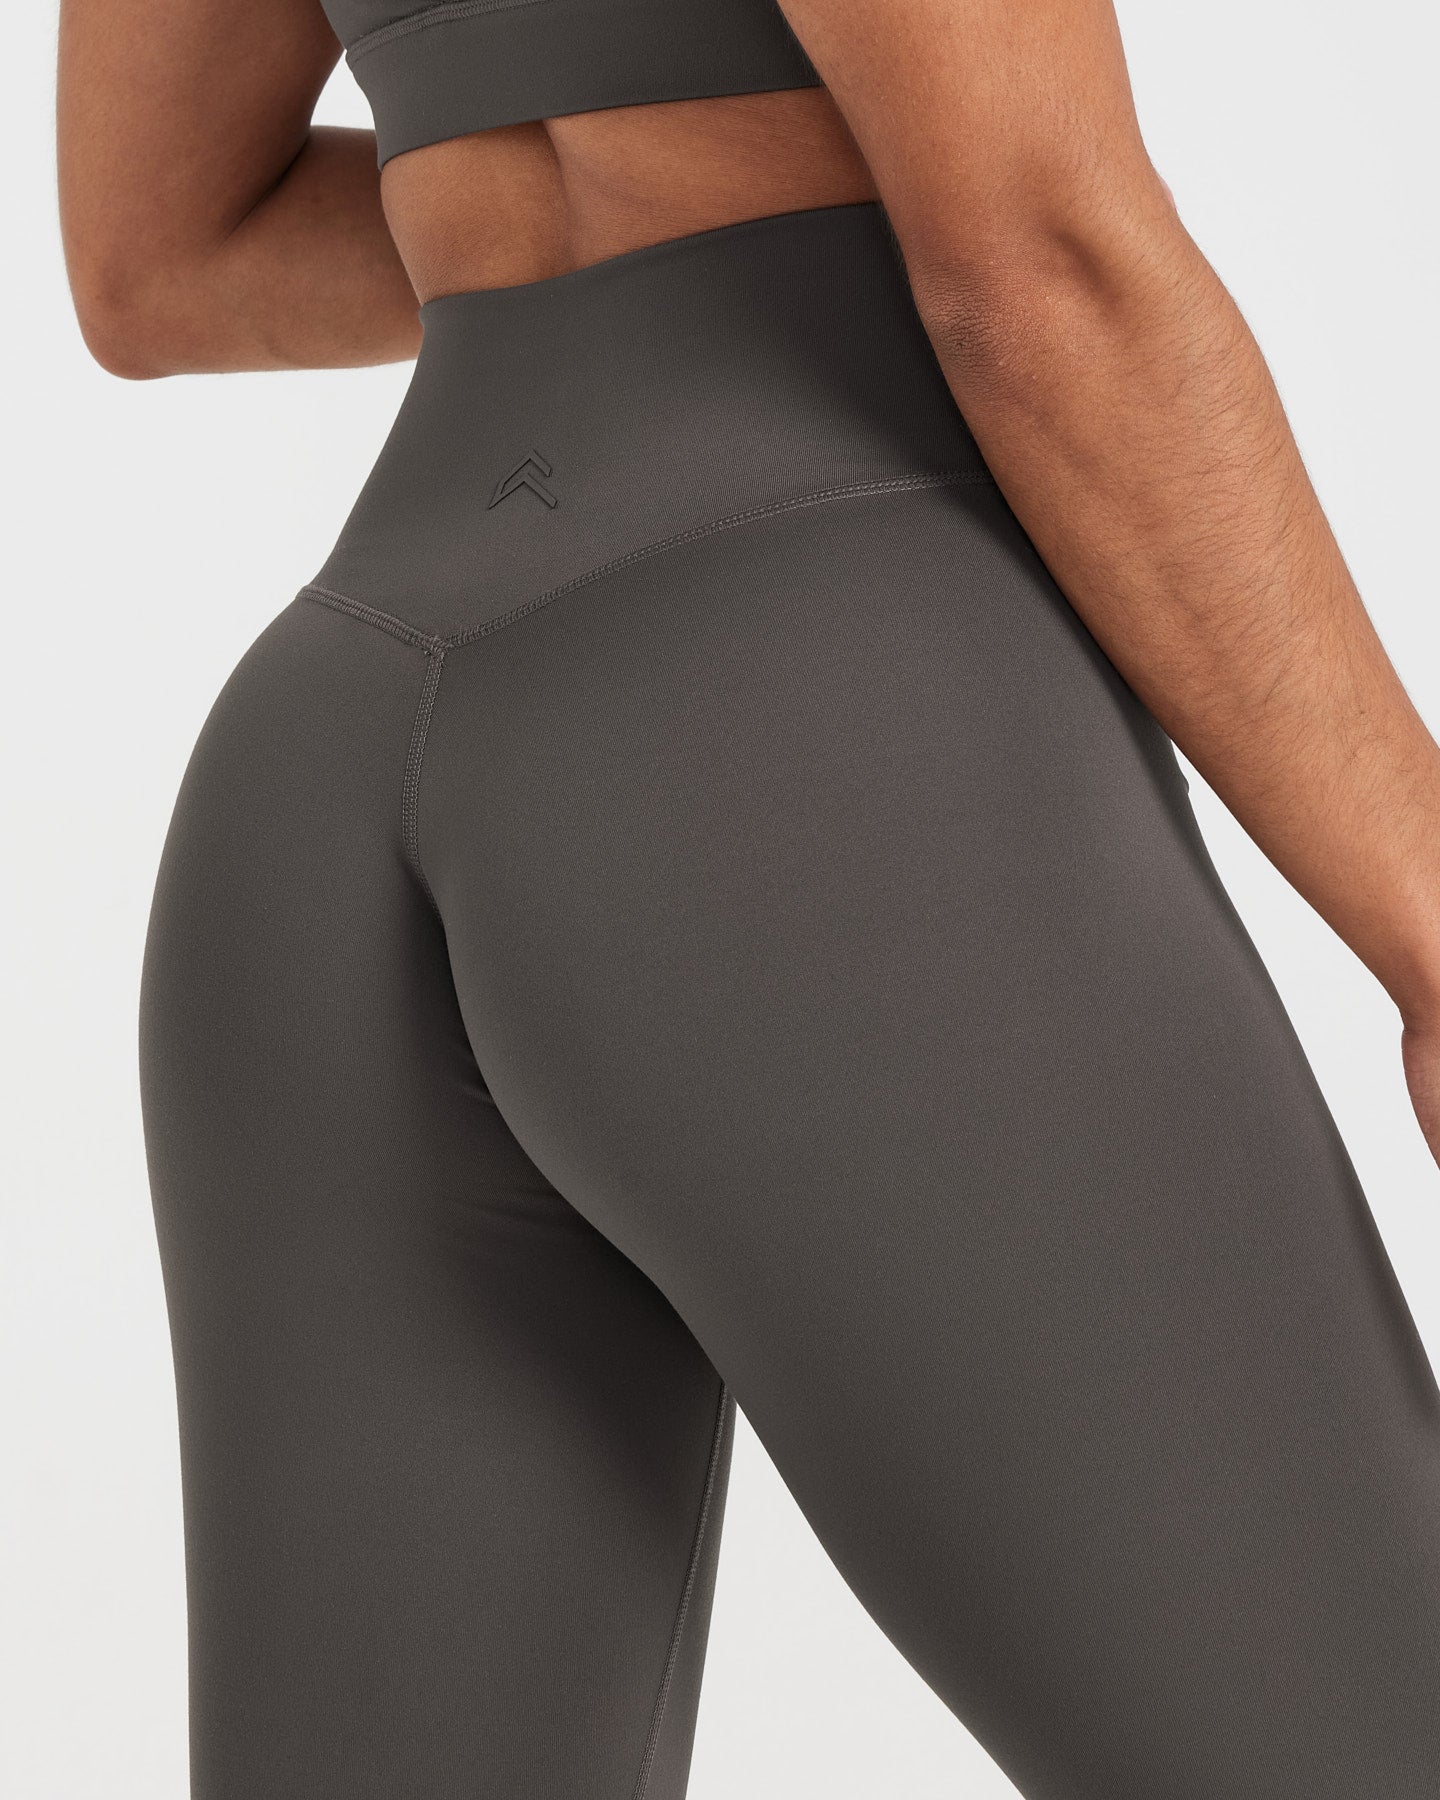 Ladies Leggings with triangle gusset - Deep Taupe | Oner Active EU